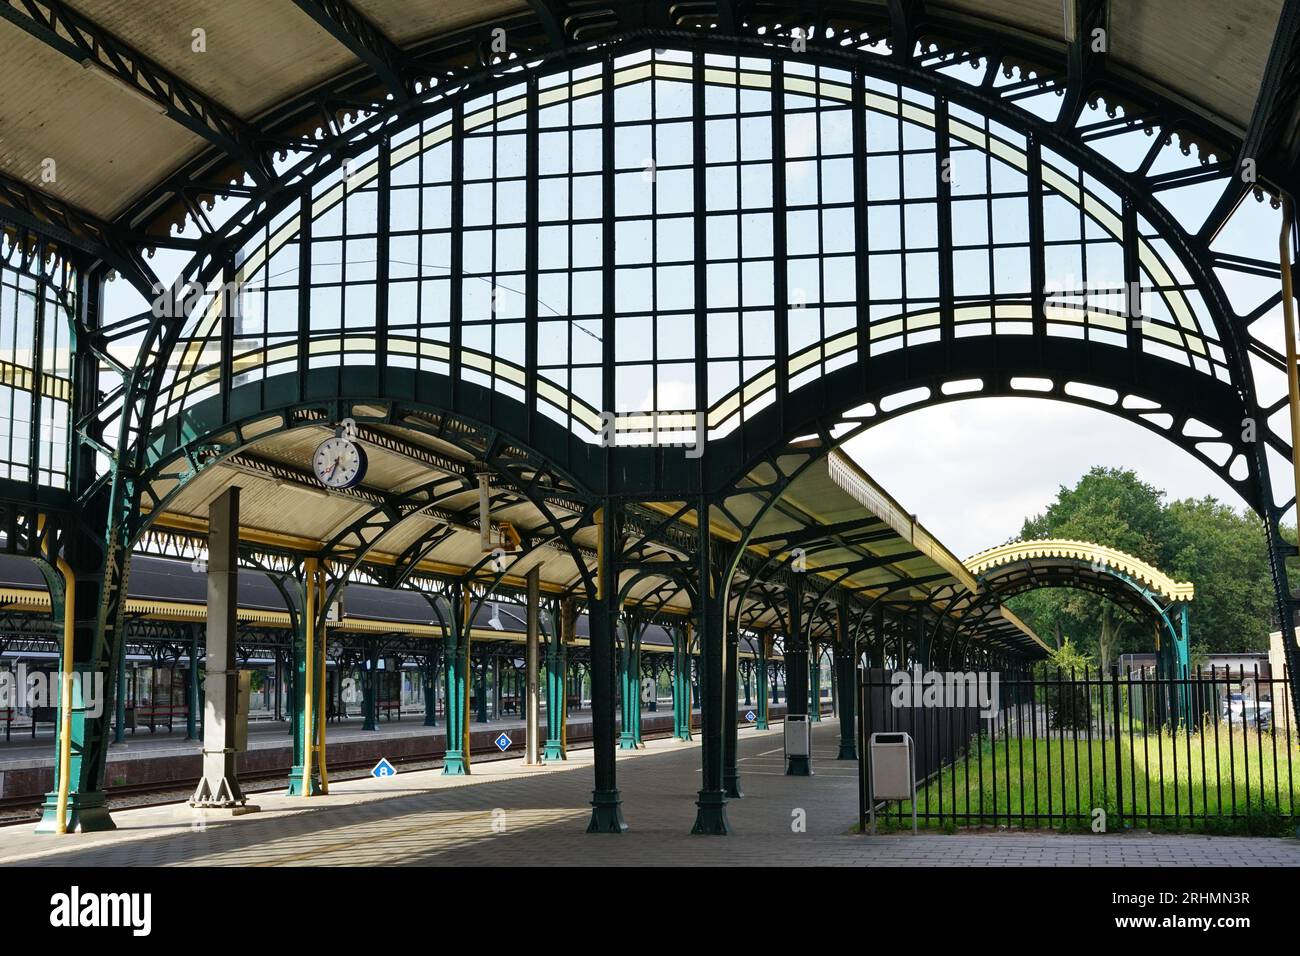 Den Bosch, Netherlands - August 15, 2023: Platform at the railway station with sunlight shining through the ancient leaded windows (stained glass) Stock Photo